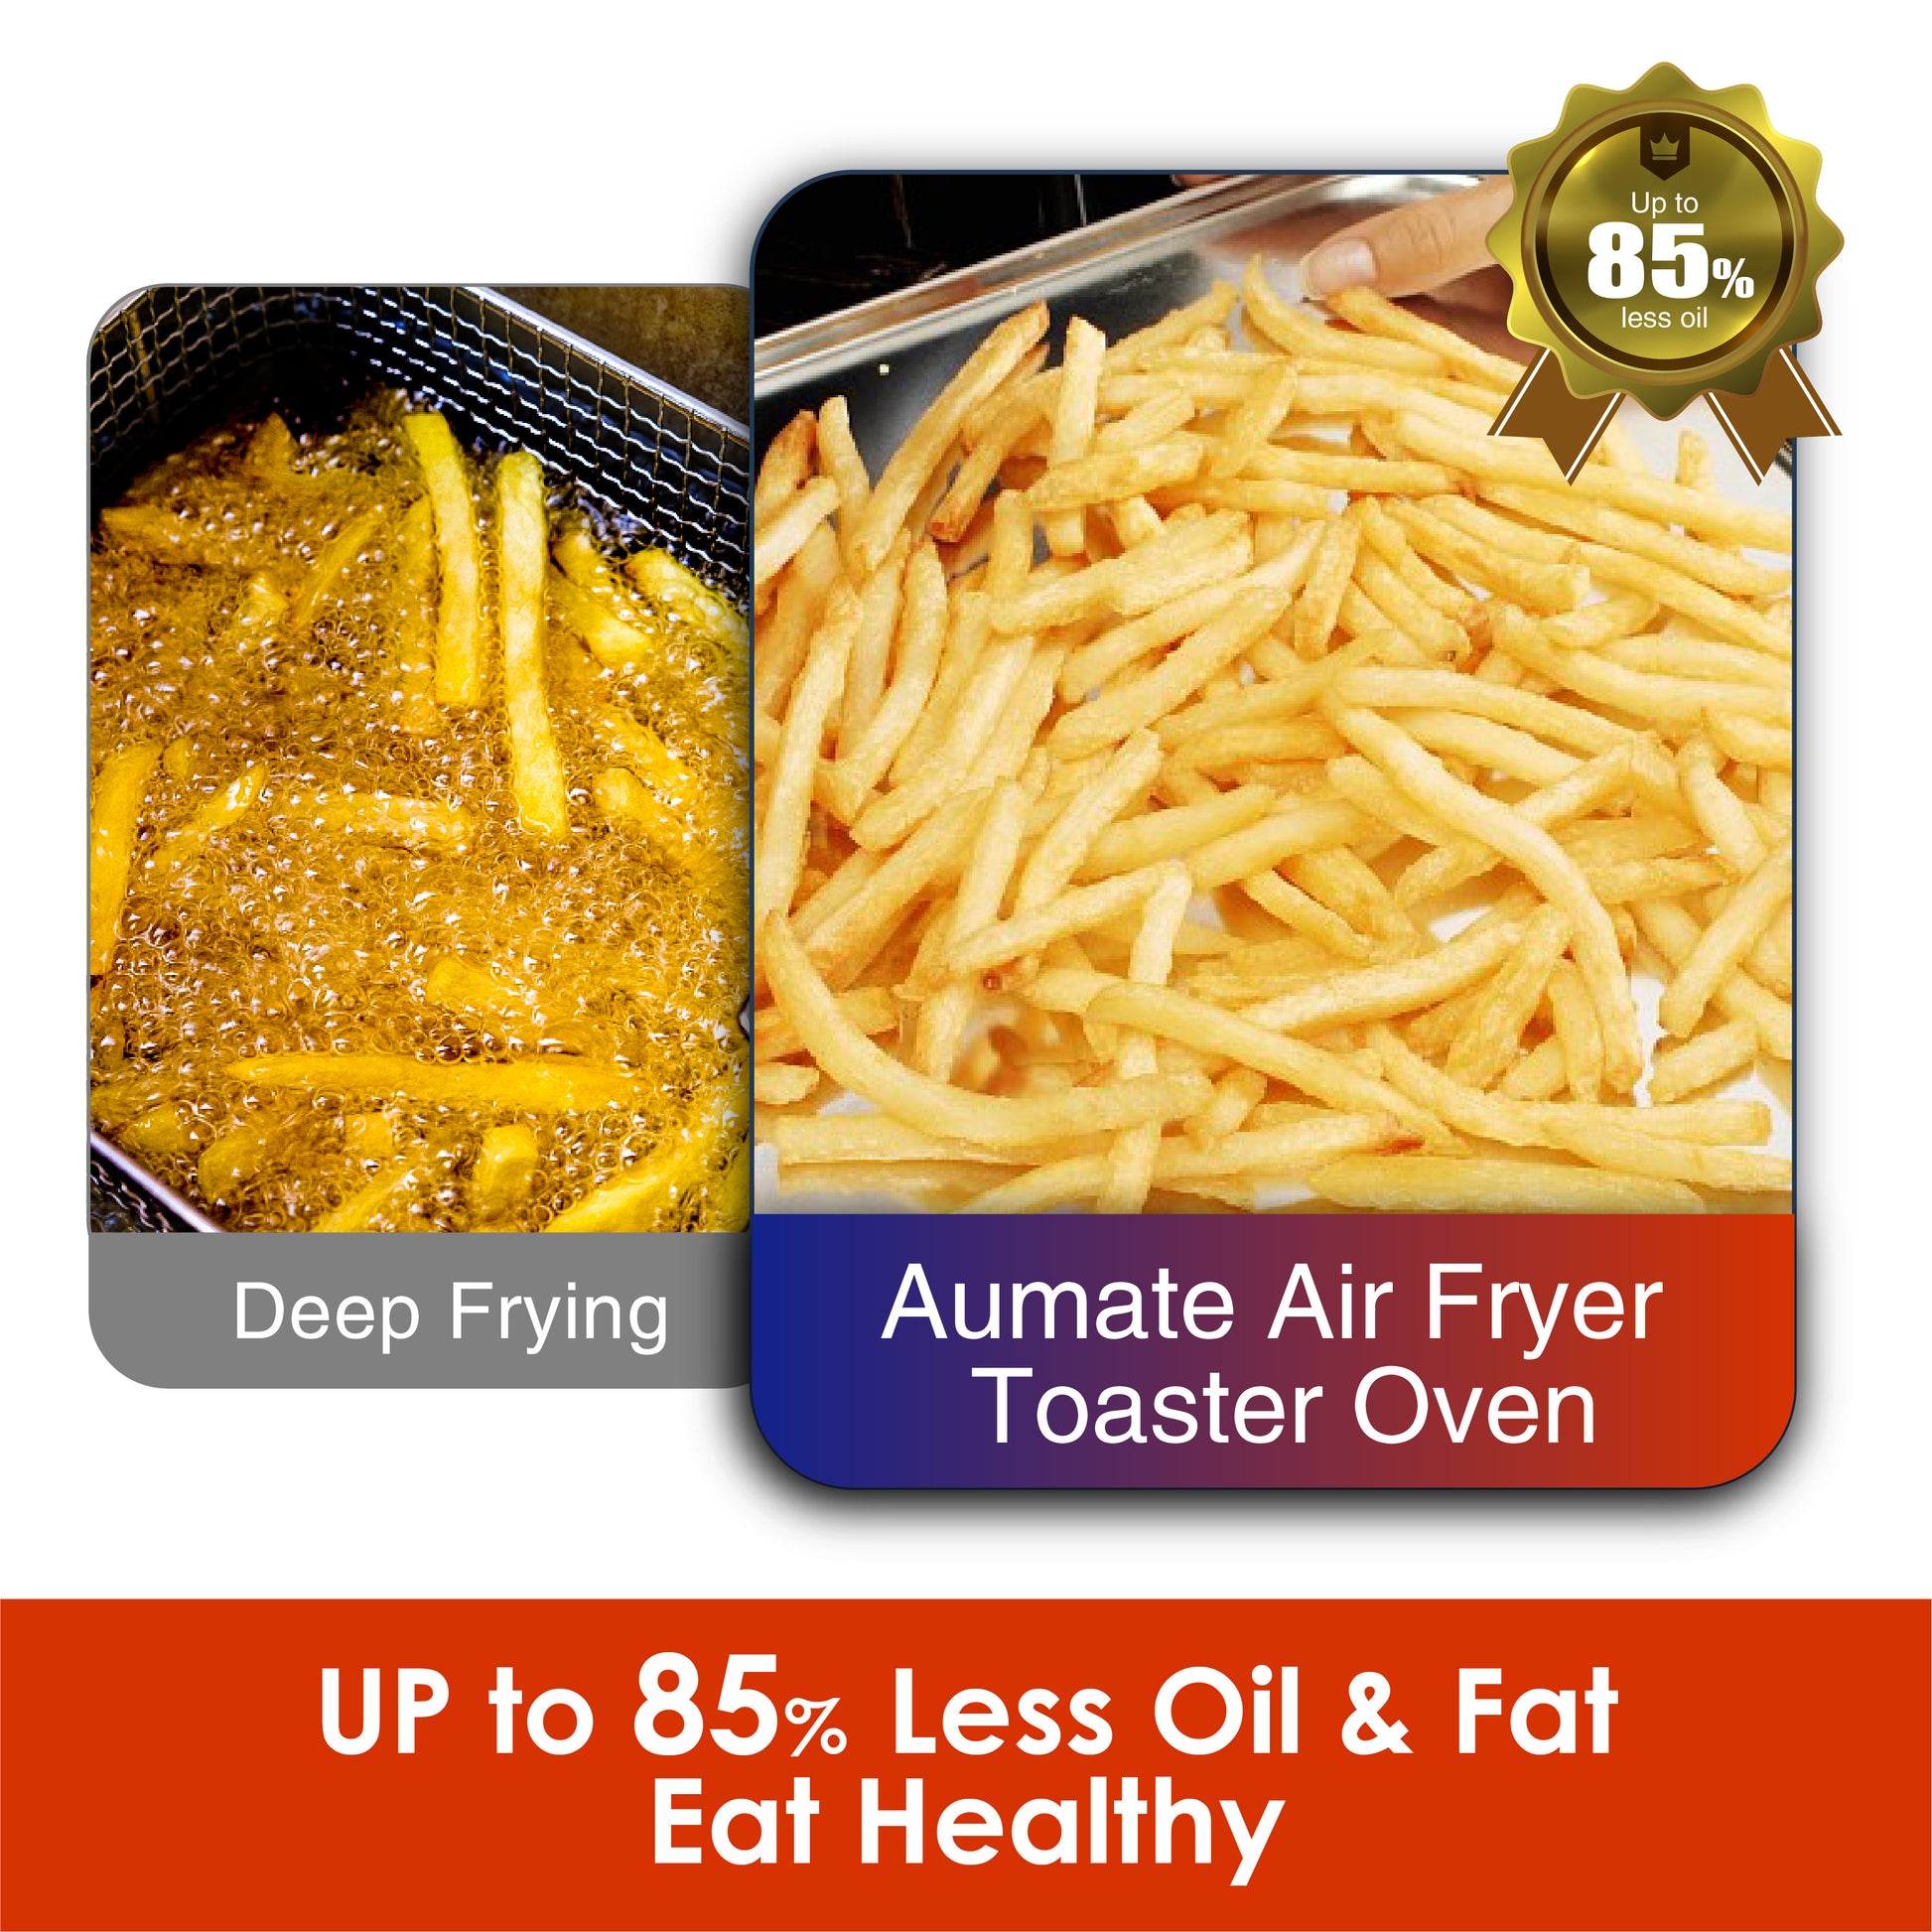 AUMATE Air Fryer Oven  Unboxing, Setup and Review 